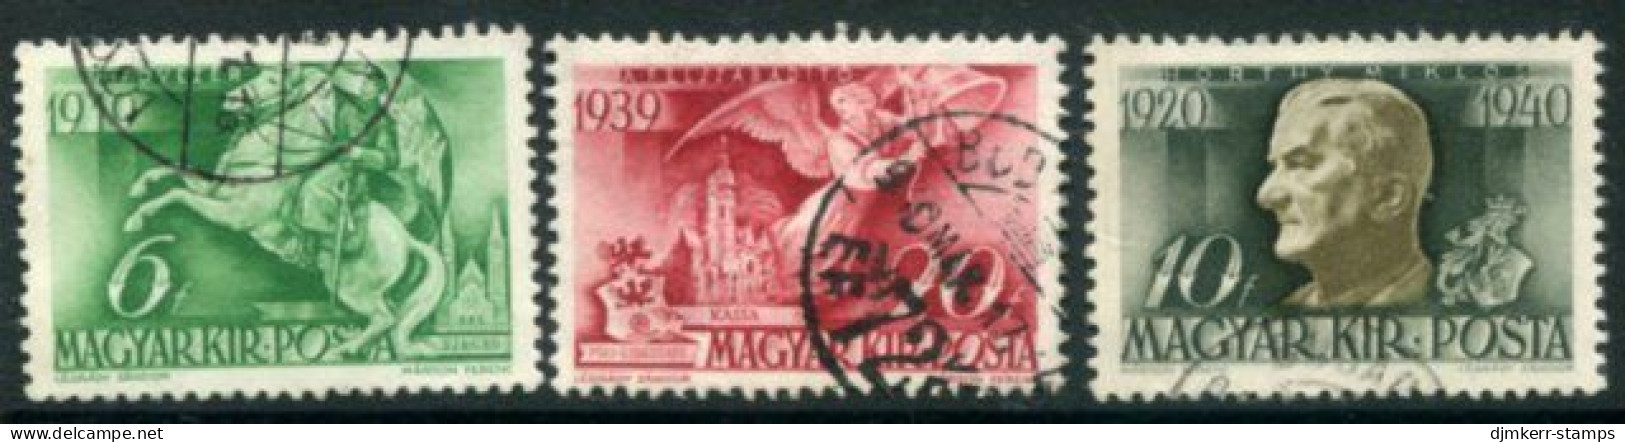 HUNGARY 1940 20th Anniversary Of Horthy Regime Used.  Michel 626-28 - Oblitérés